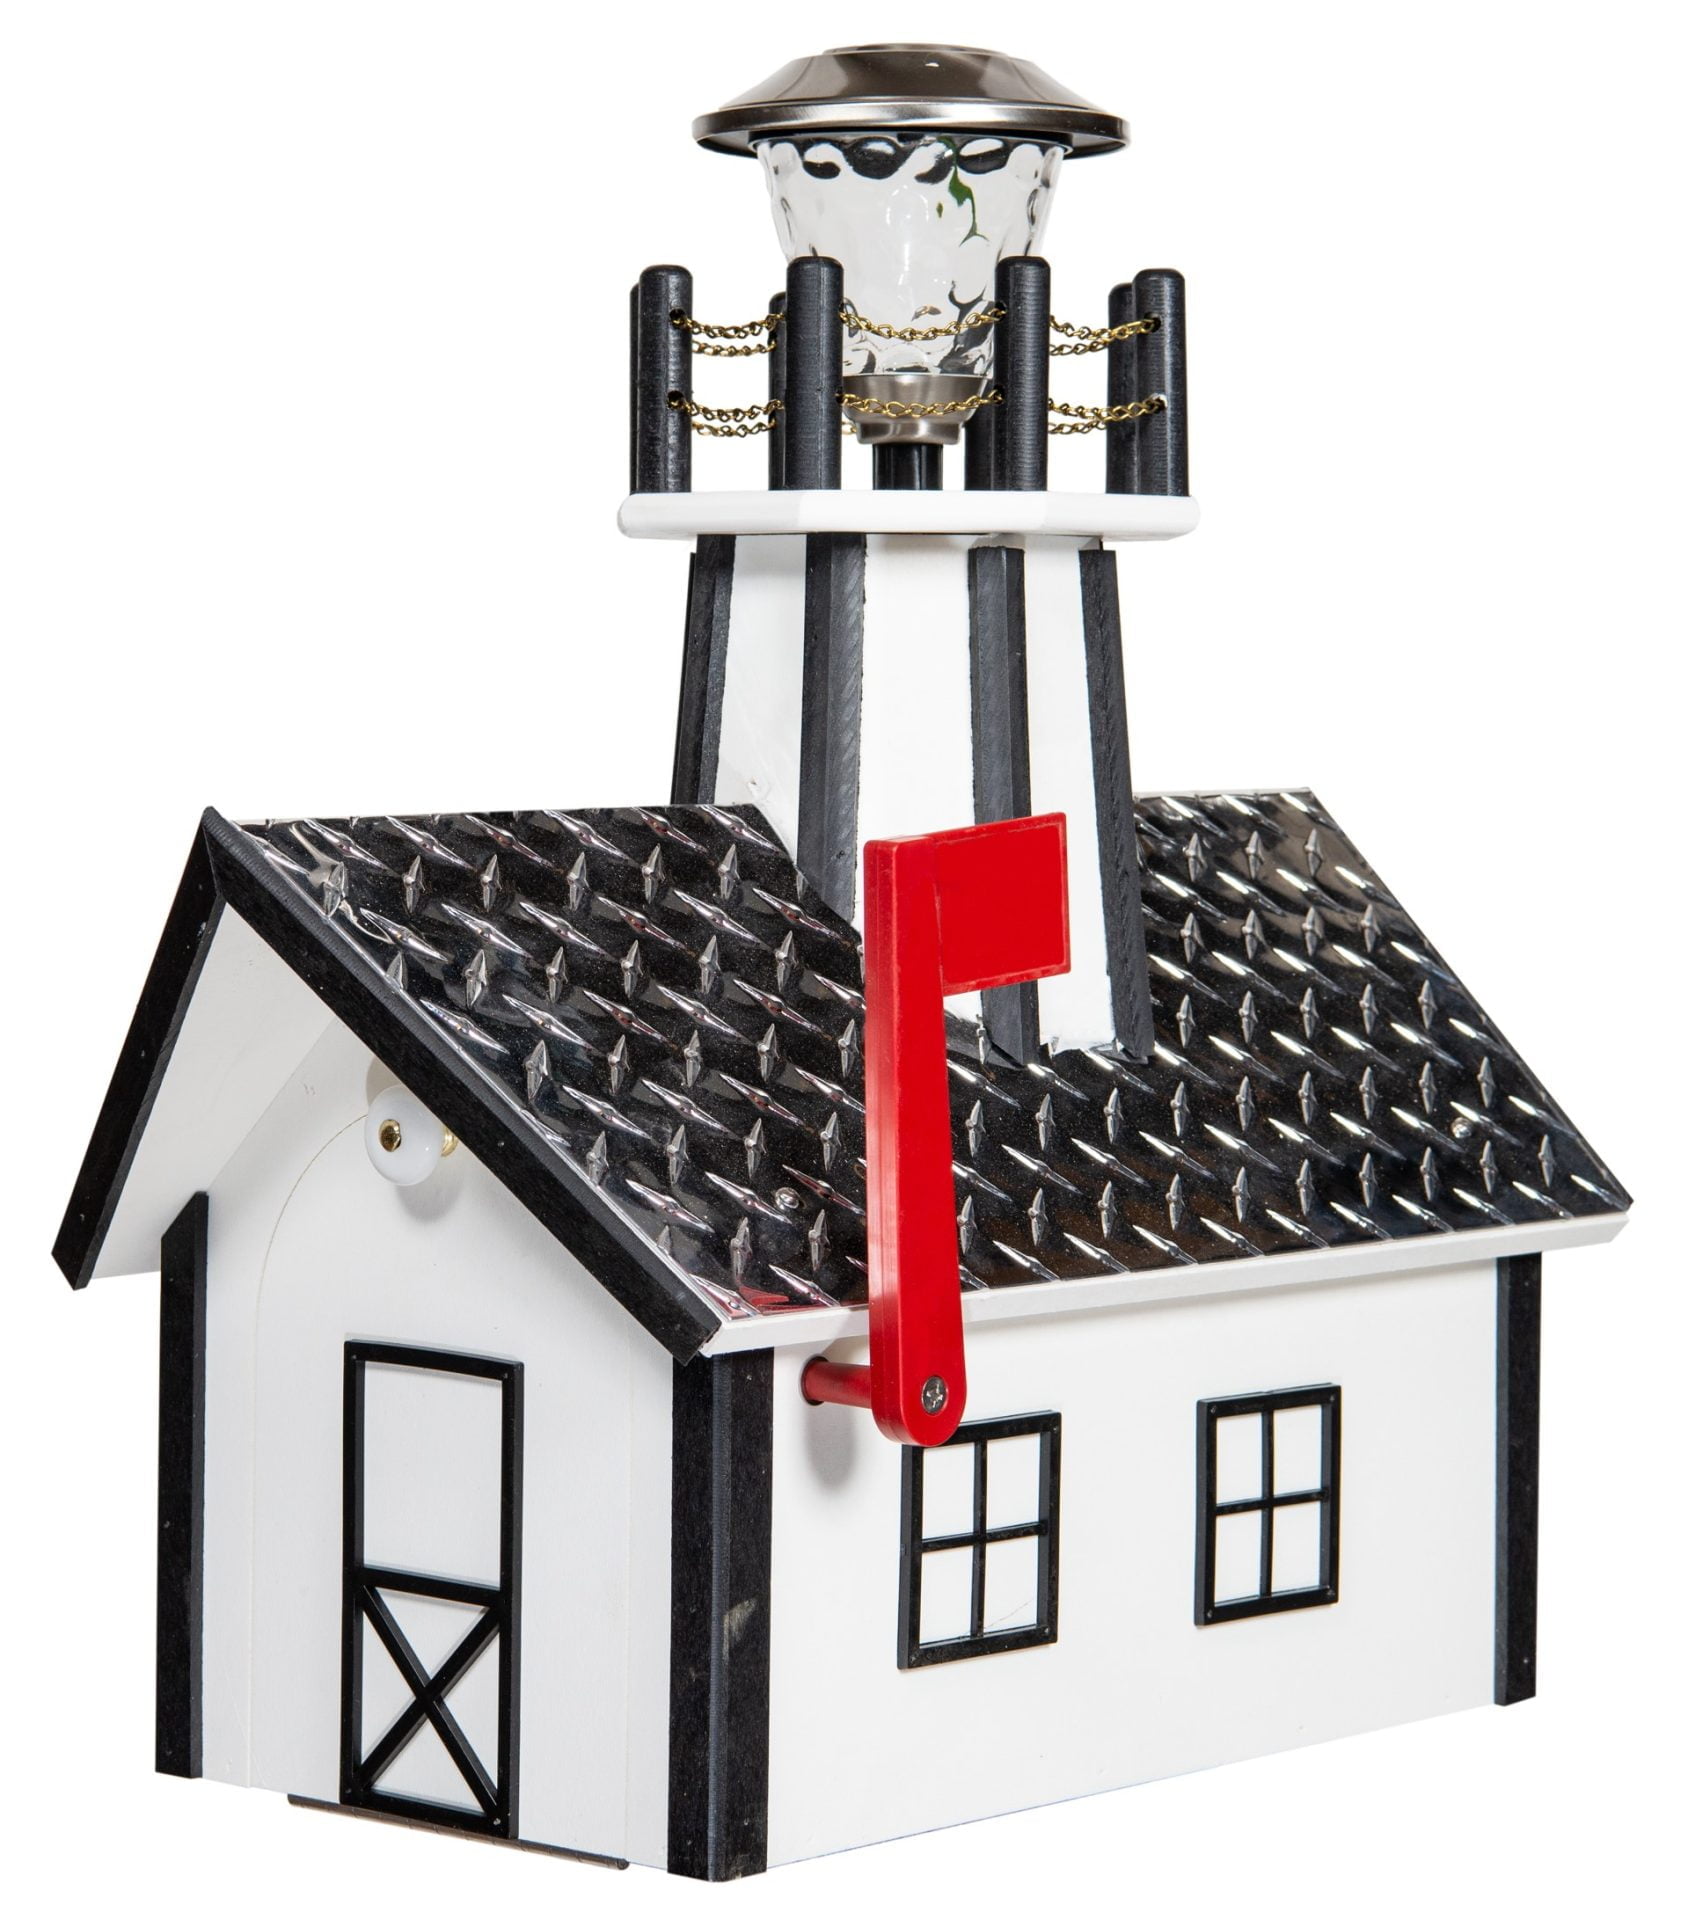 Aluminum Diamond Plate Roof Deluxe Mailbox with Lighthouse